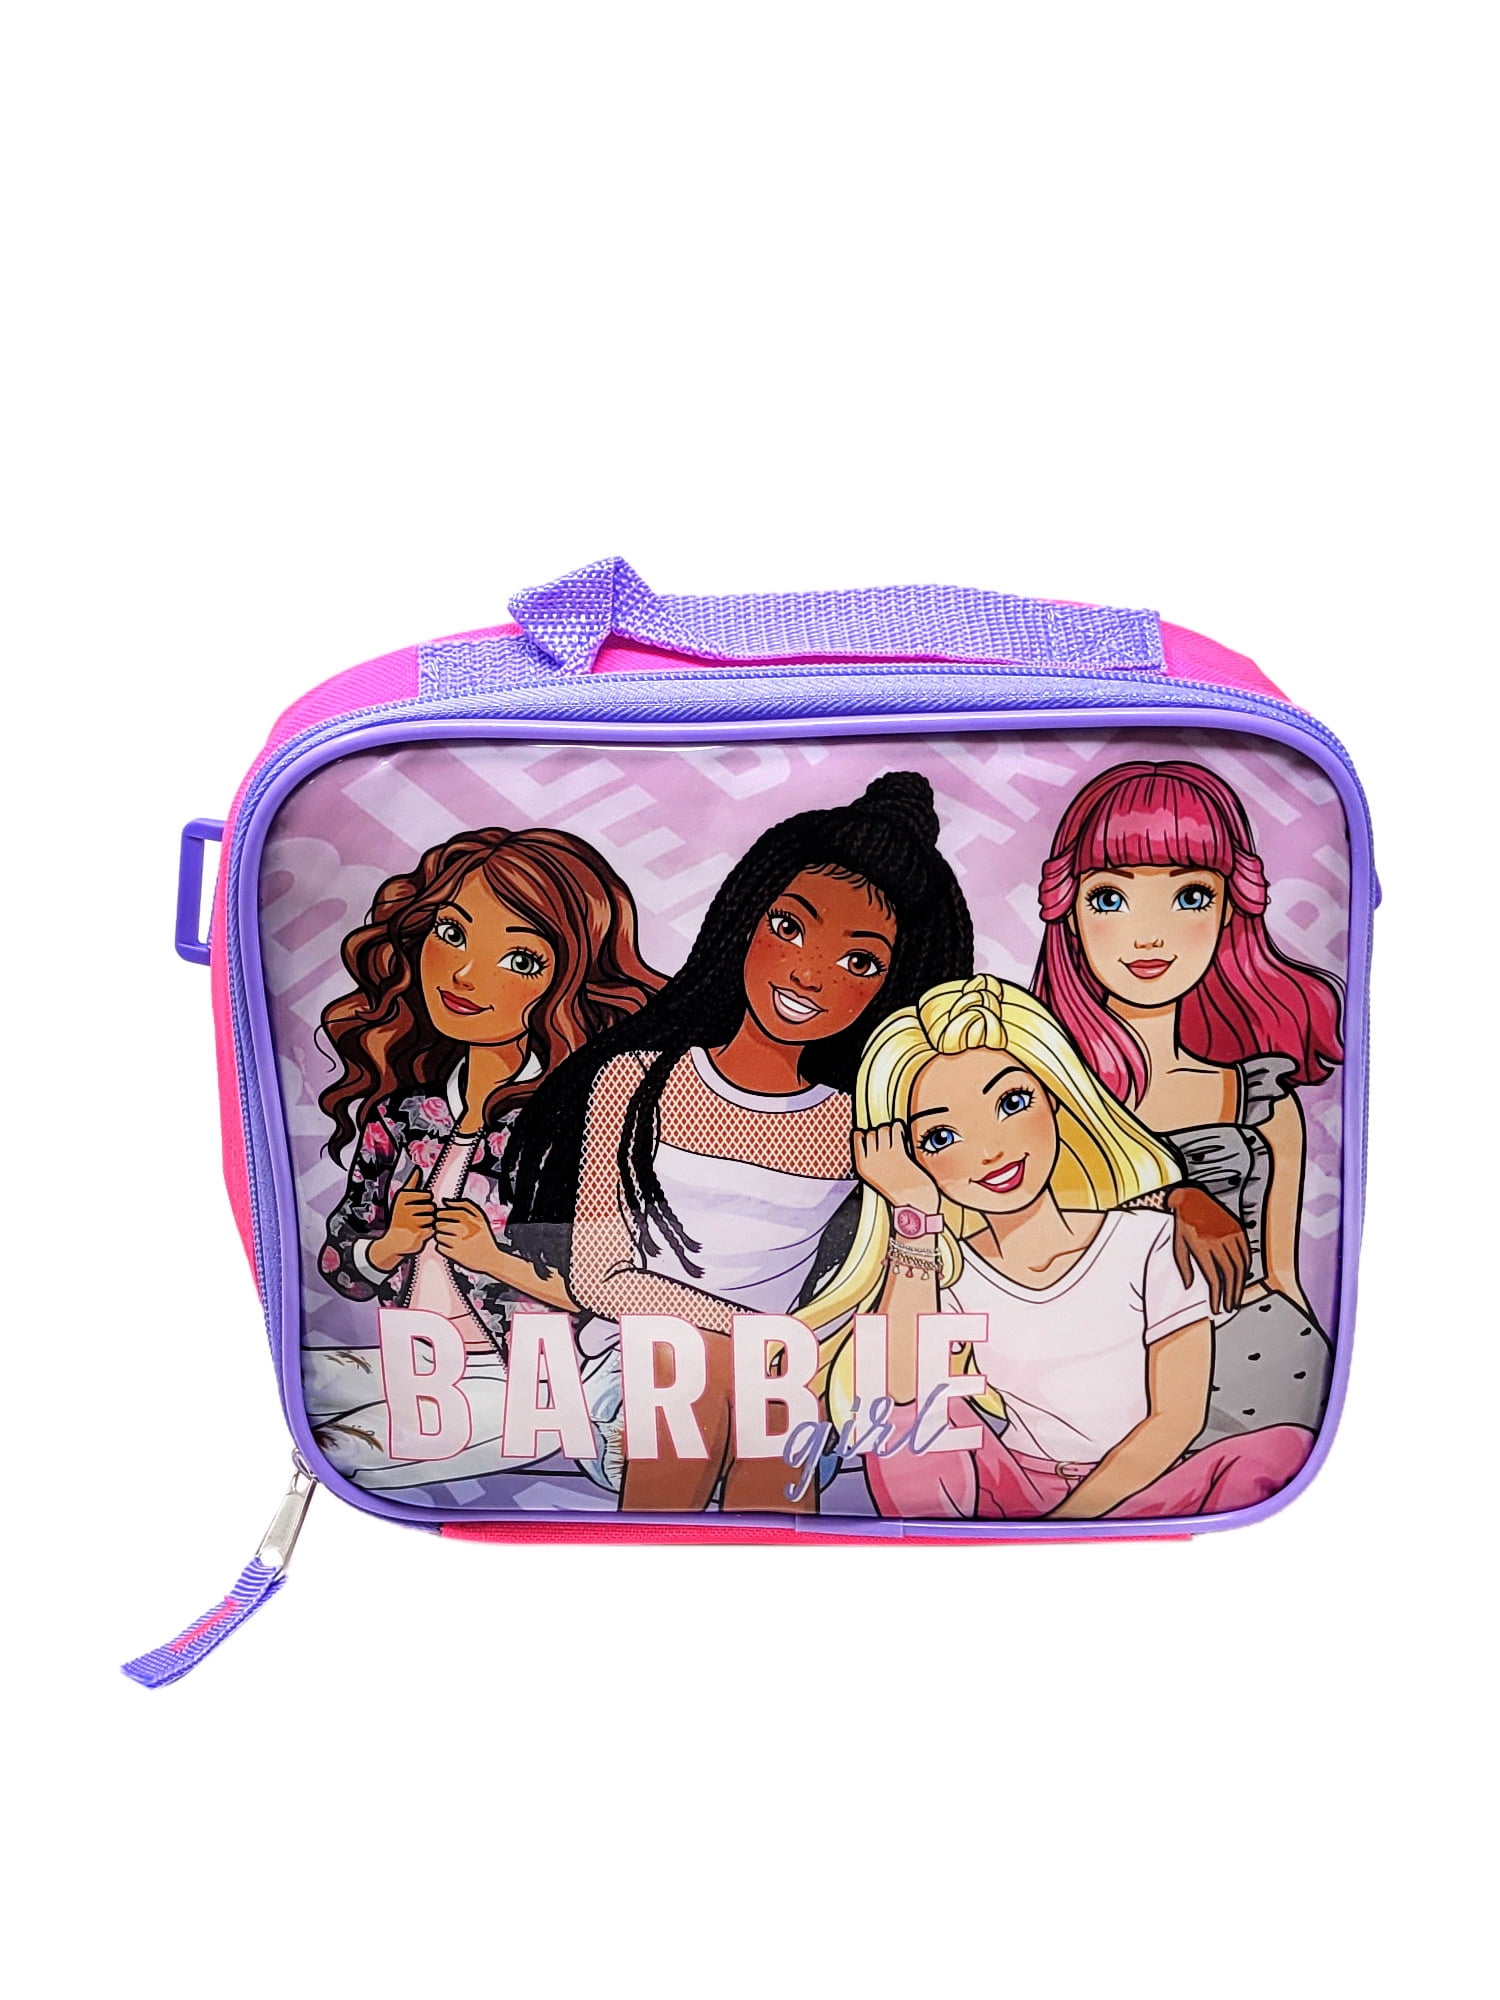 3 Piece Barbie Backpack Lunch Box Set Tote Bag Flip Sequin Pink Large Size  ~ NEW